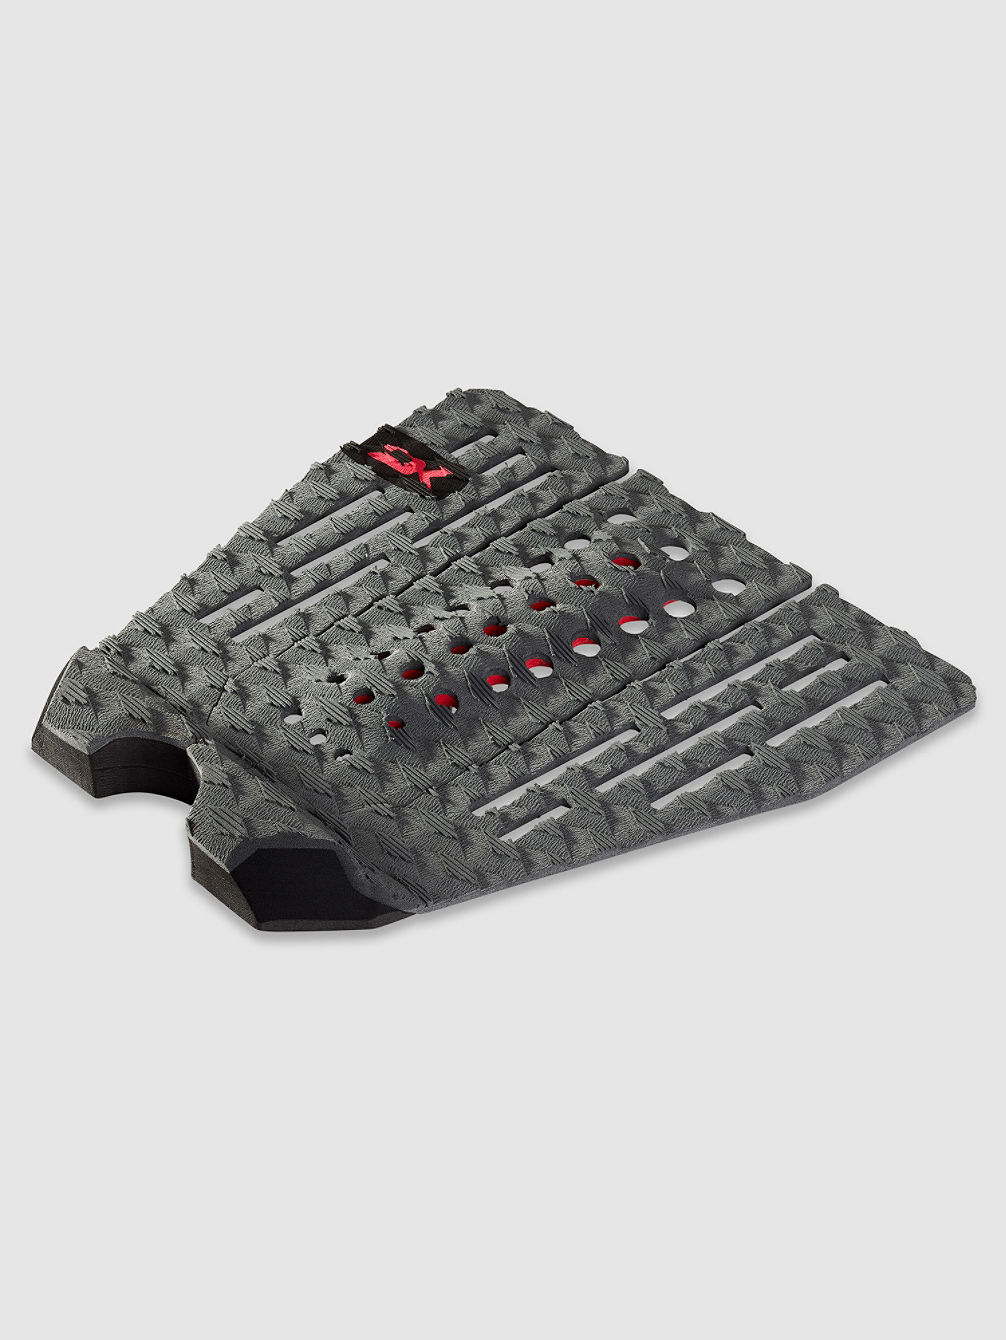 Evade Surf Traction Tail Pad